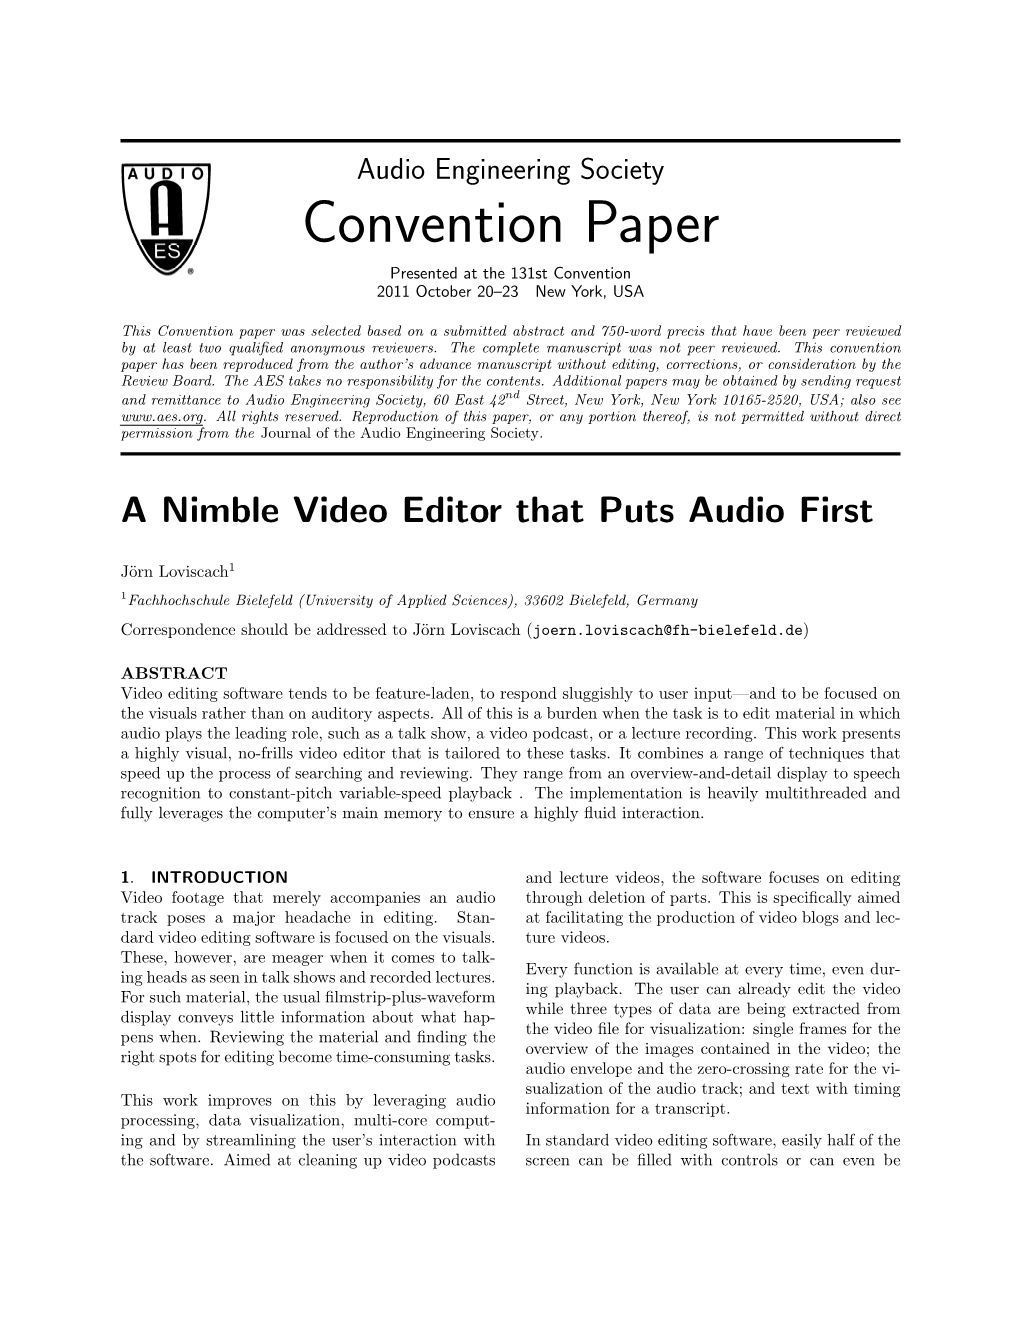 Convention Paper Presented at the 131St Convention 2011 October 20–23 New York, USA